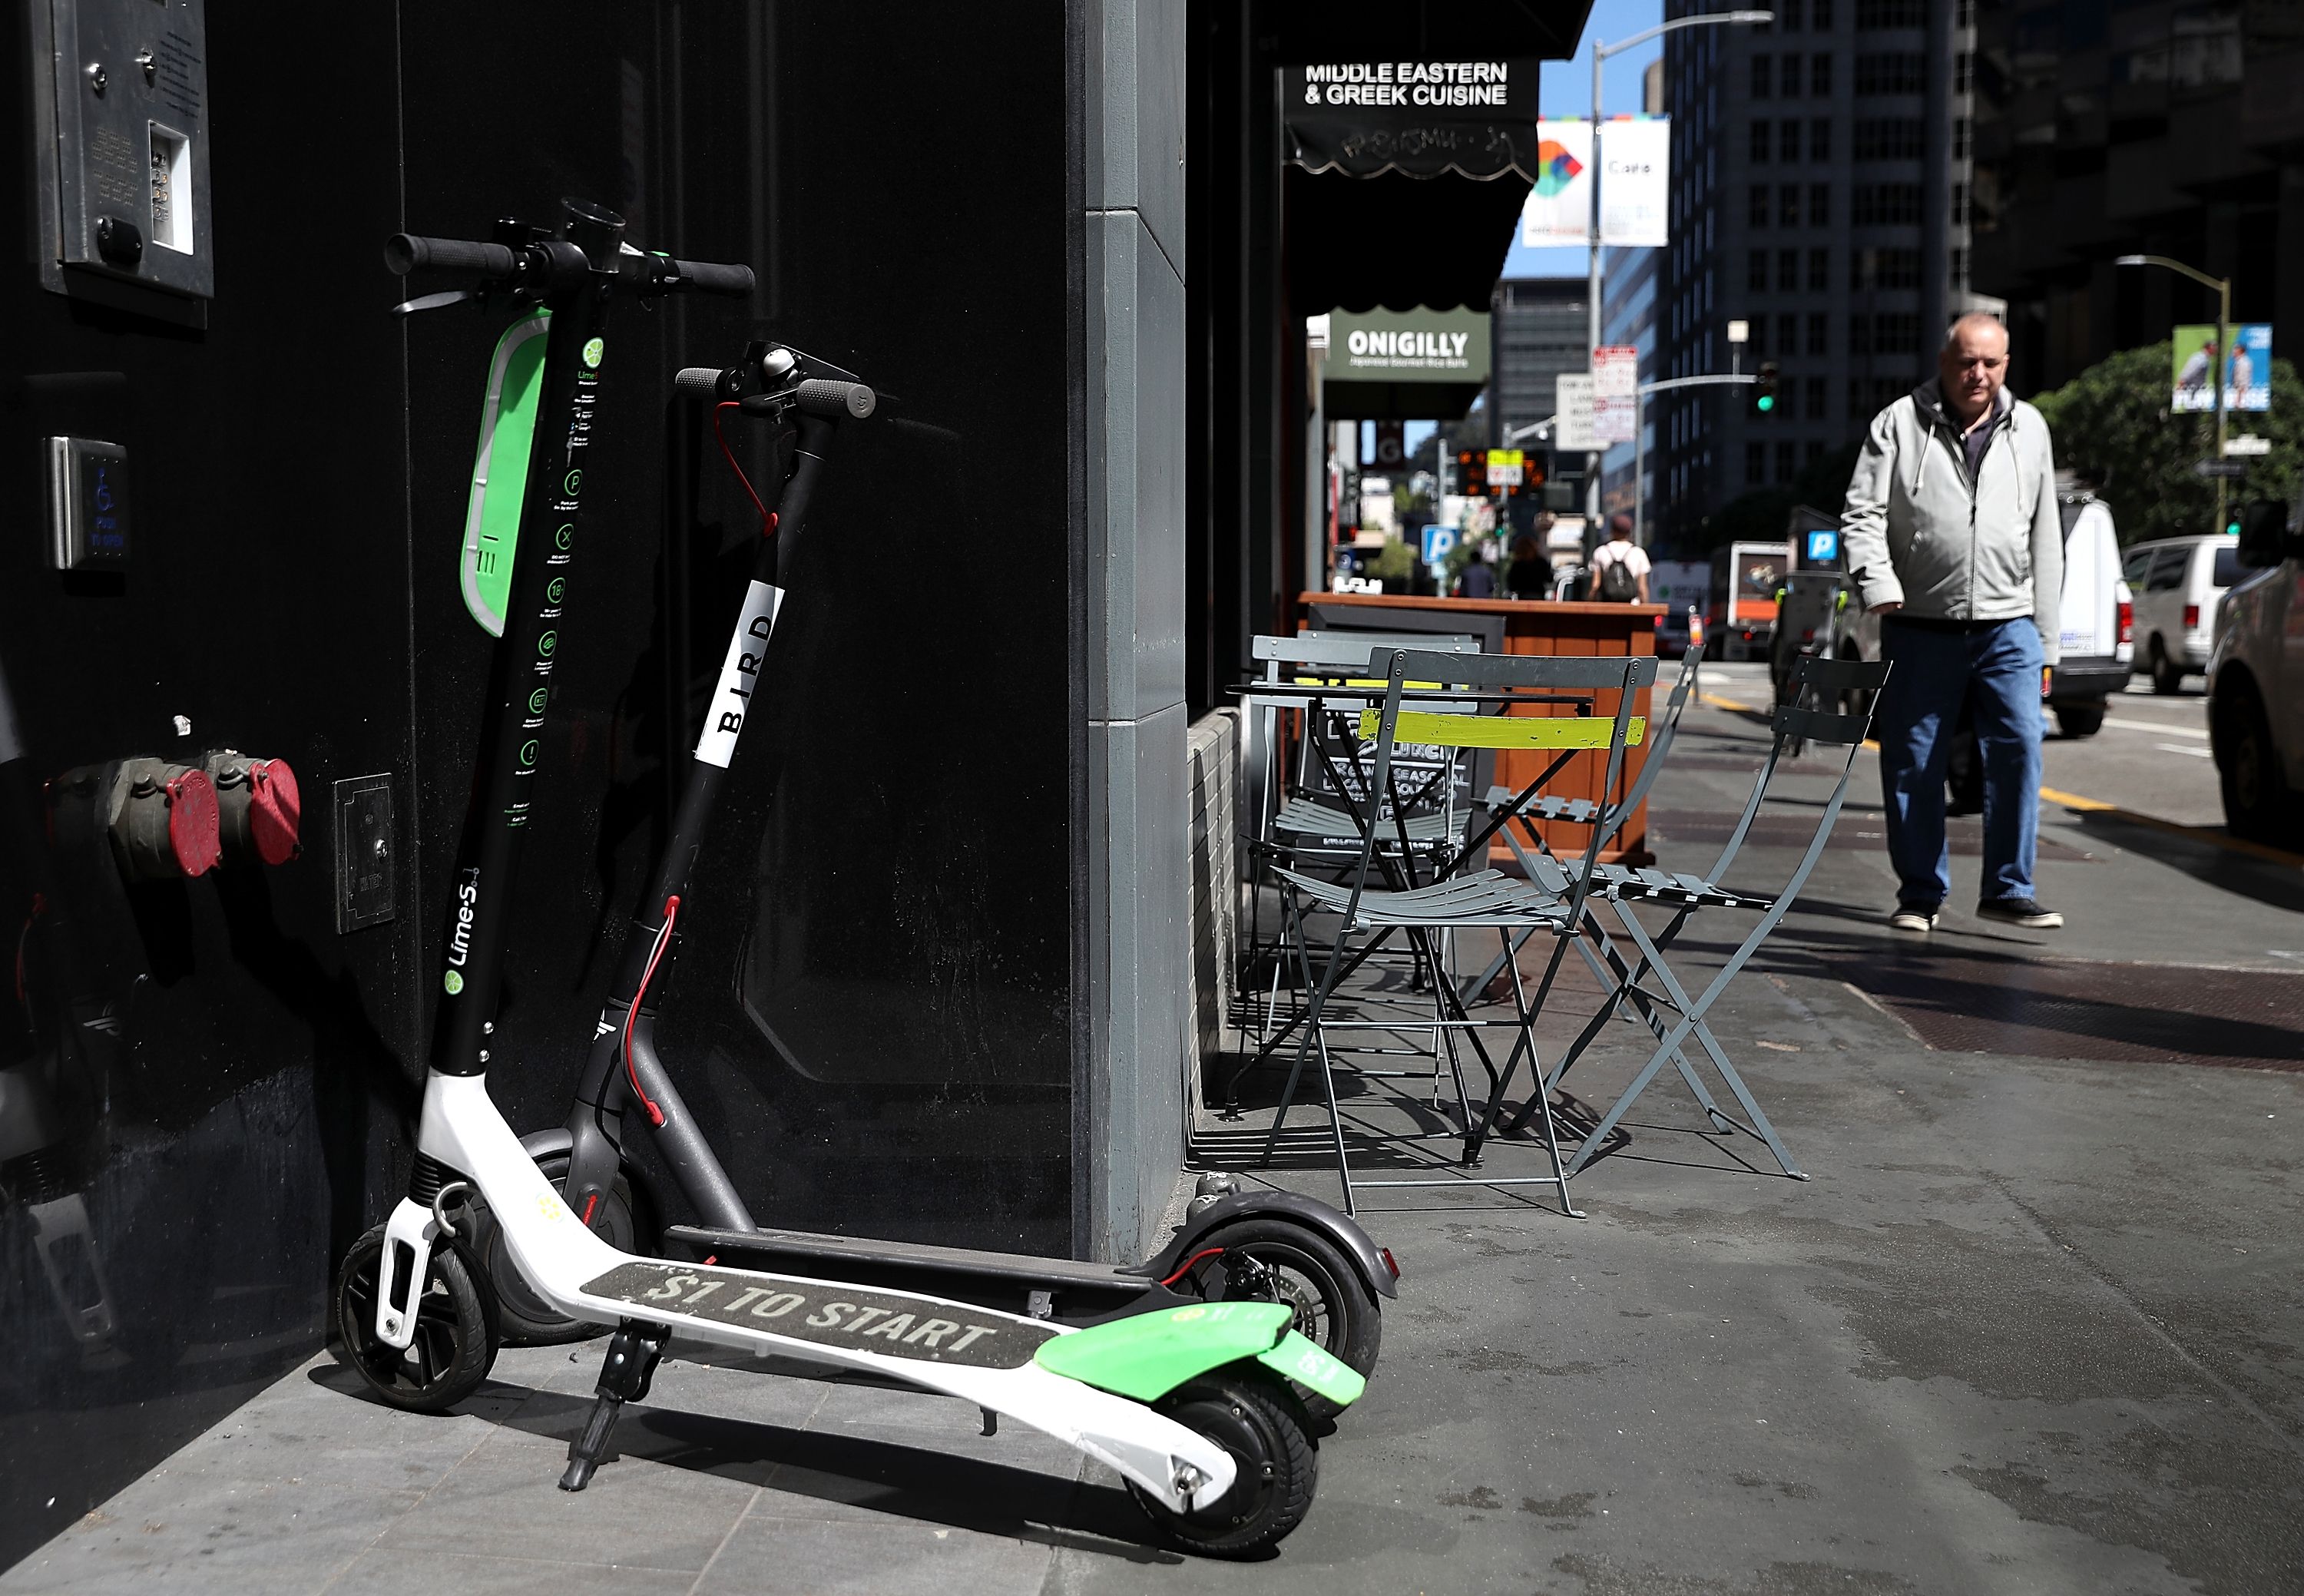 Green and white Lime scooters parked on the sidewalk. A male pedestrian walks near them.